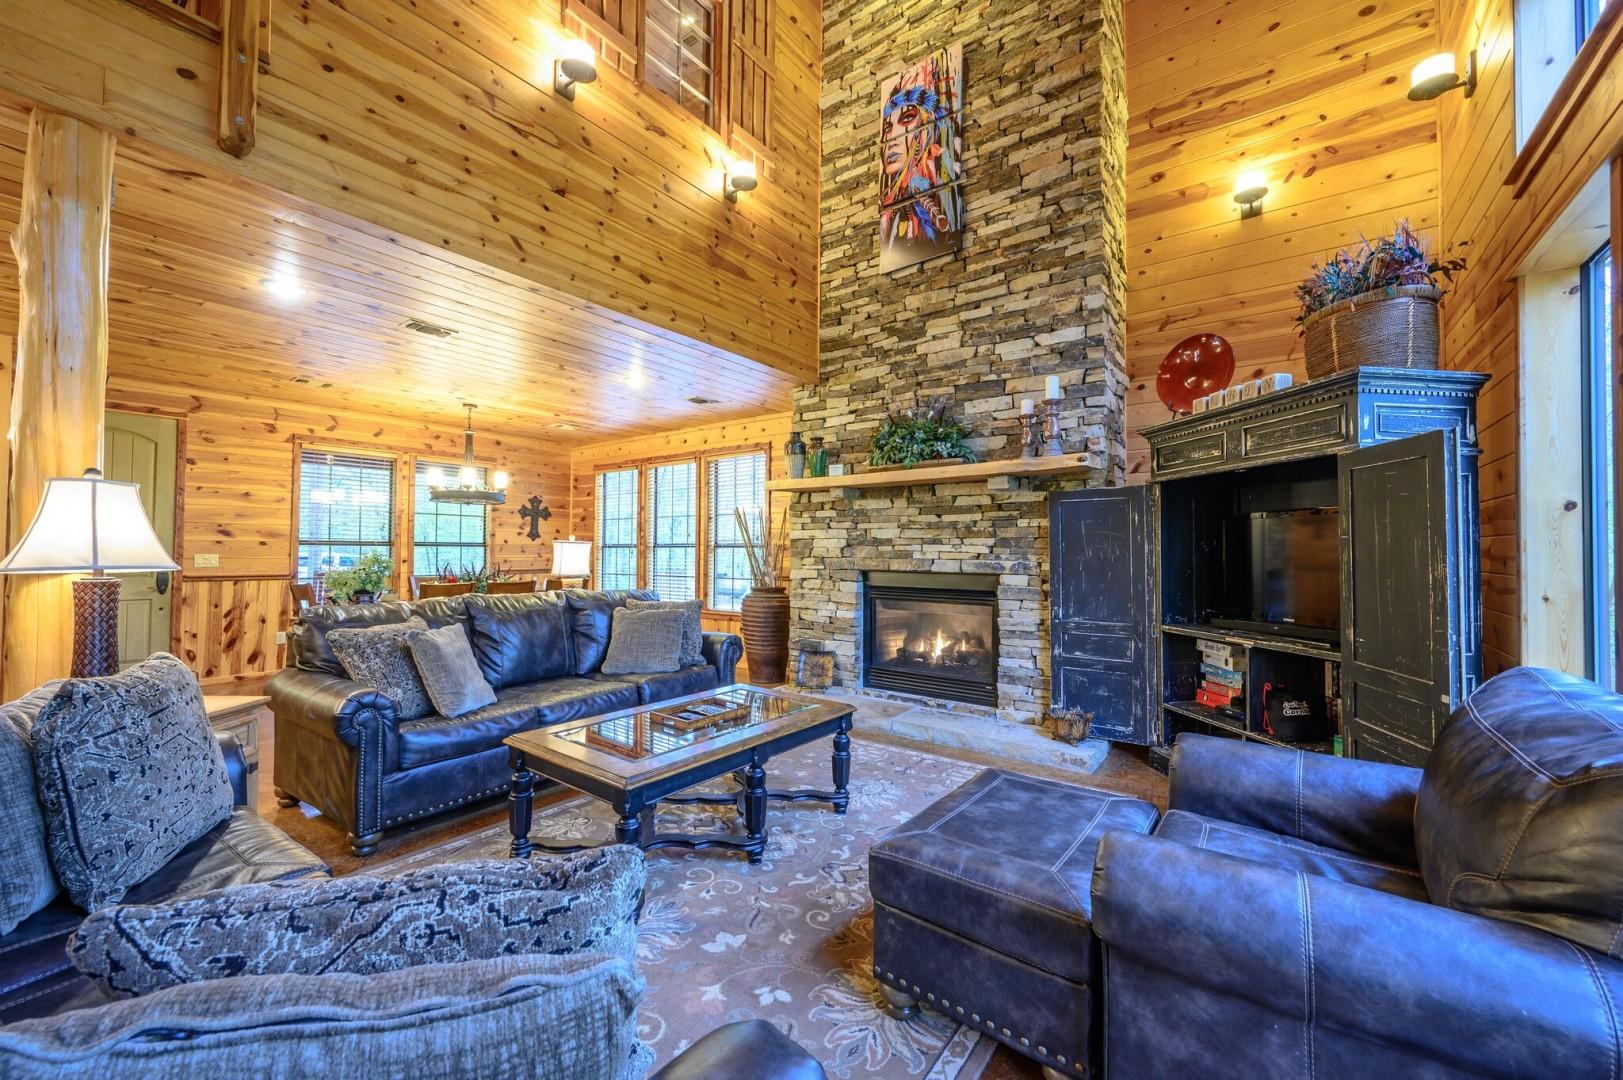 The interior of Creekside Lodge, a pet friendly cabin rental in Broken Bow